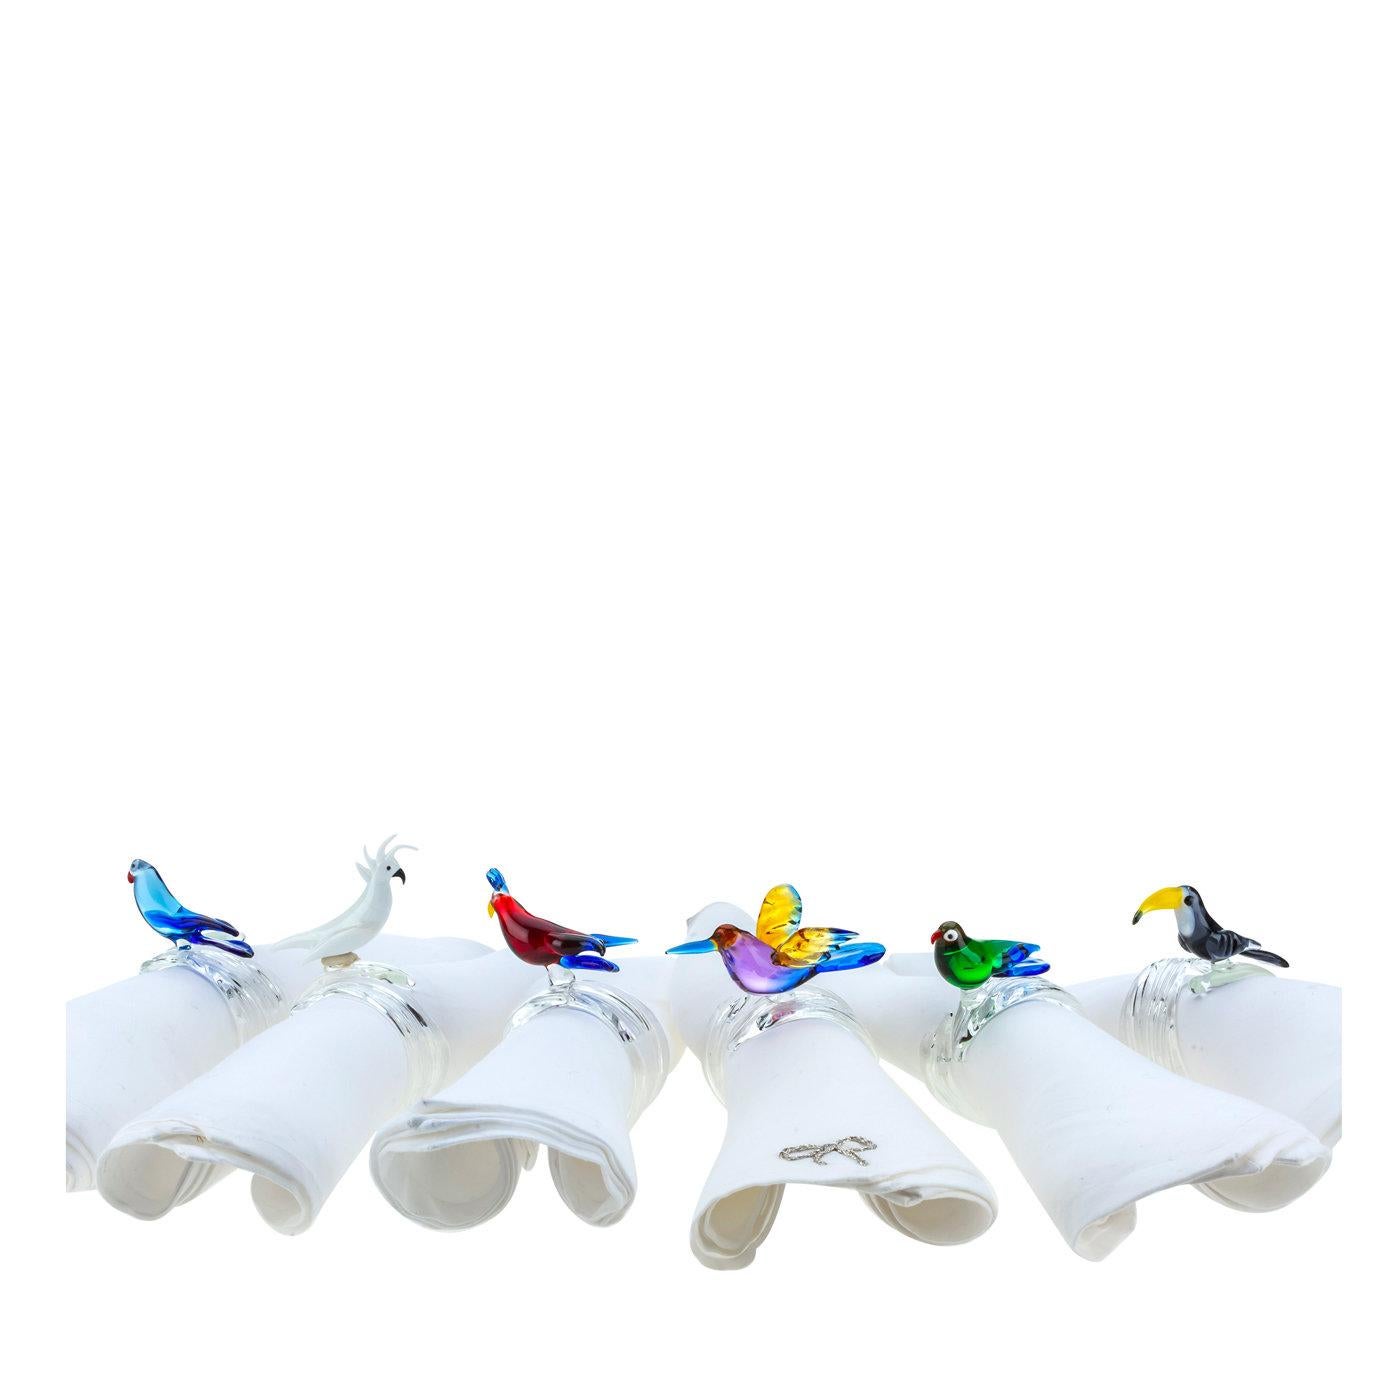 Functional and stylish, this set of six napkin rings boasts a skillful glass rendition of tropical birds in bright colors. A refined and charming addition to any table setting, this set includes a white cockatoo, a bird of paradise, a red bird, a